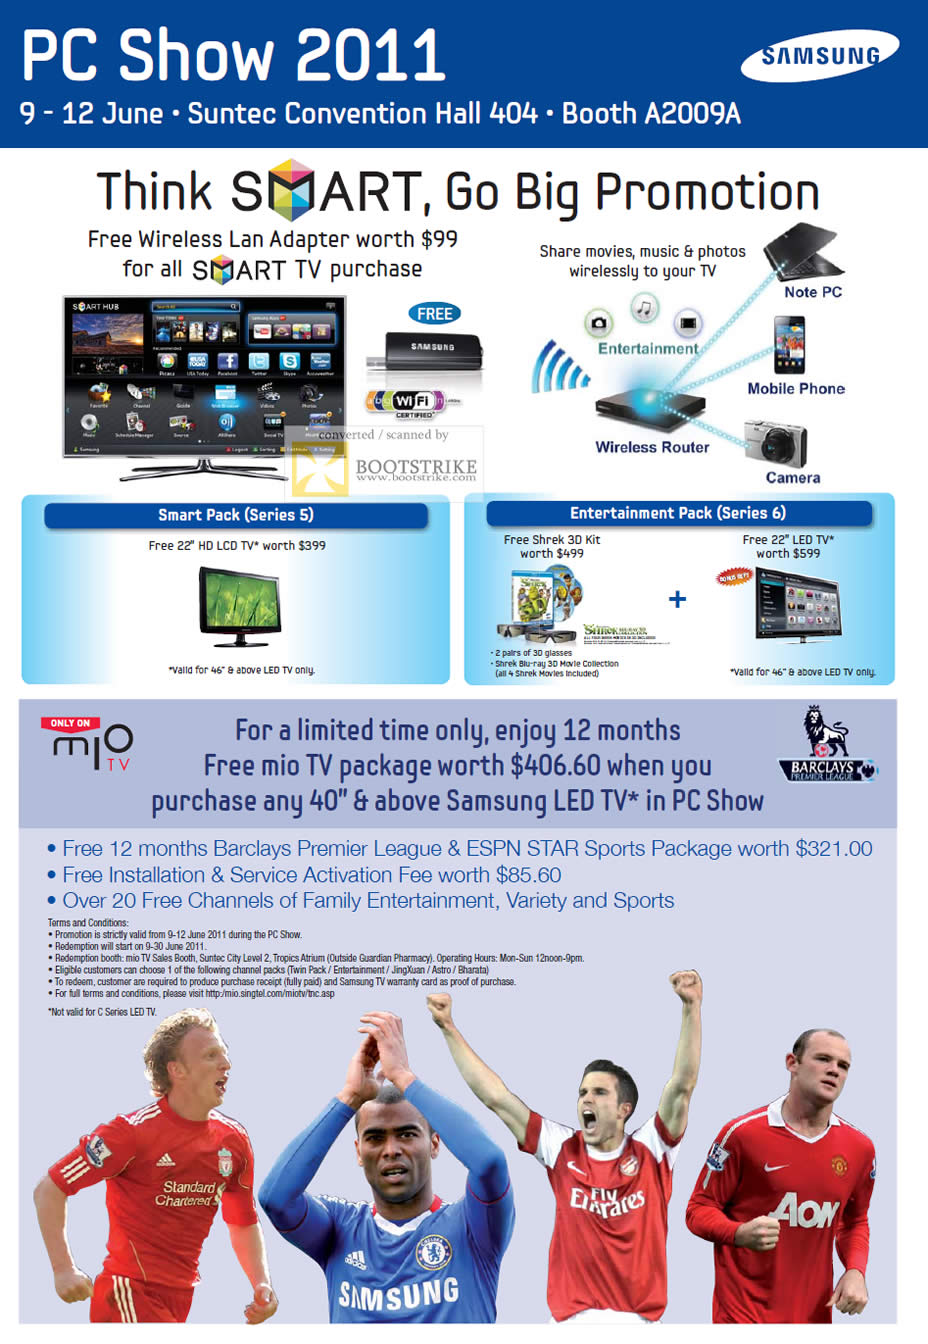 PC Show 2011 price list image brochure of Samsung Courts Smart TV Series 5 Entertainment Pack Series 6